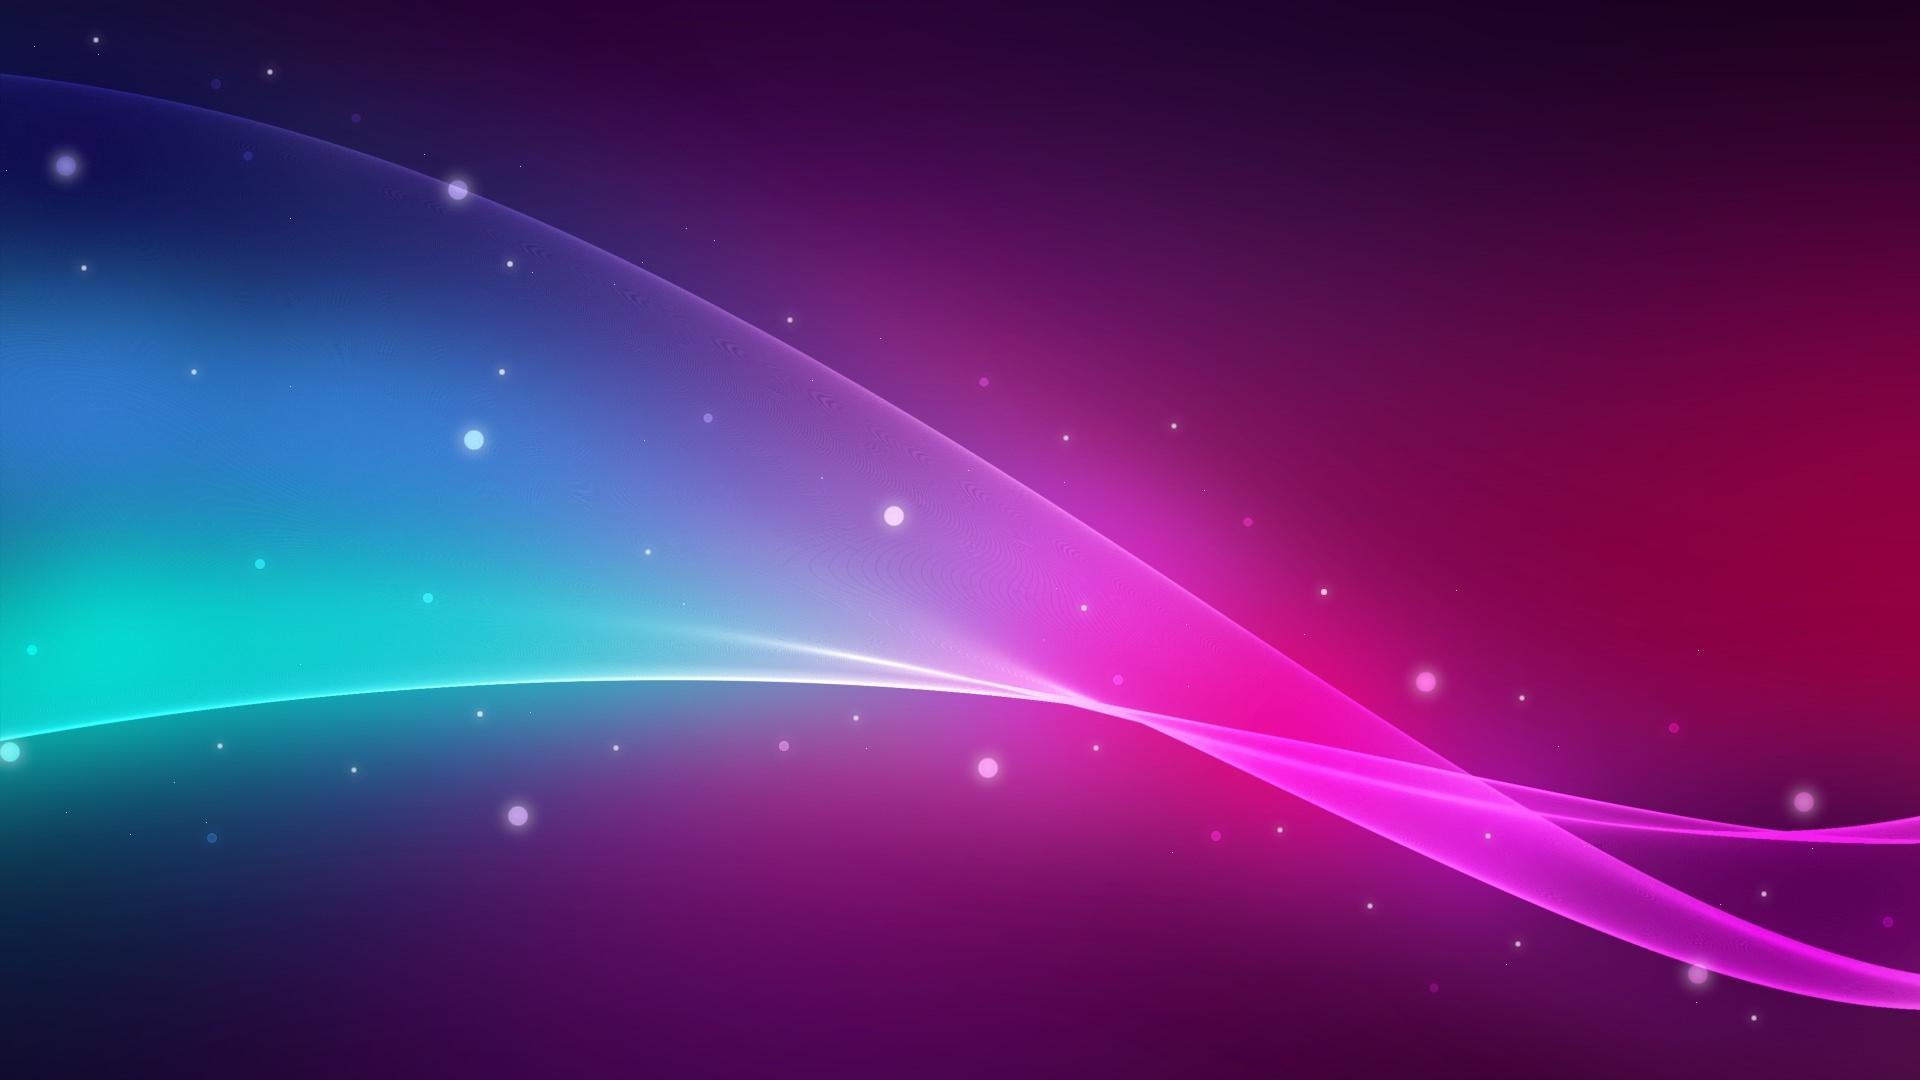 Magical Graphic Design Vector Purple Pink Blue Background 1920×1080